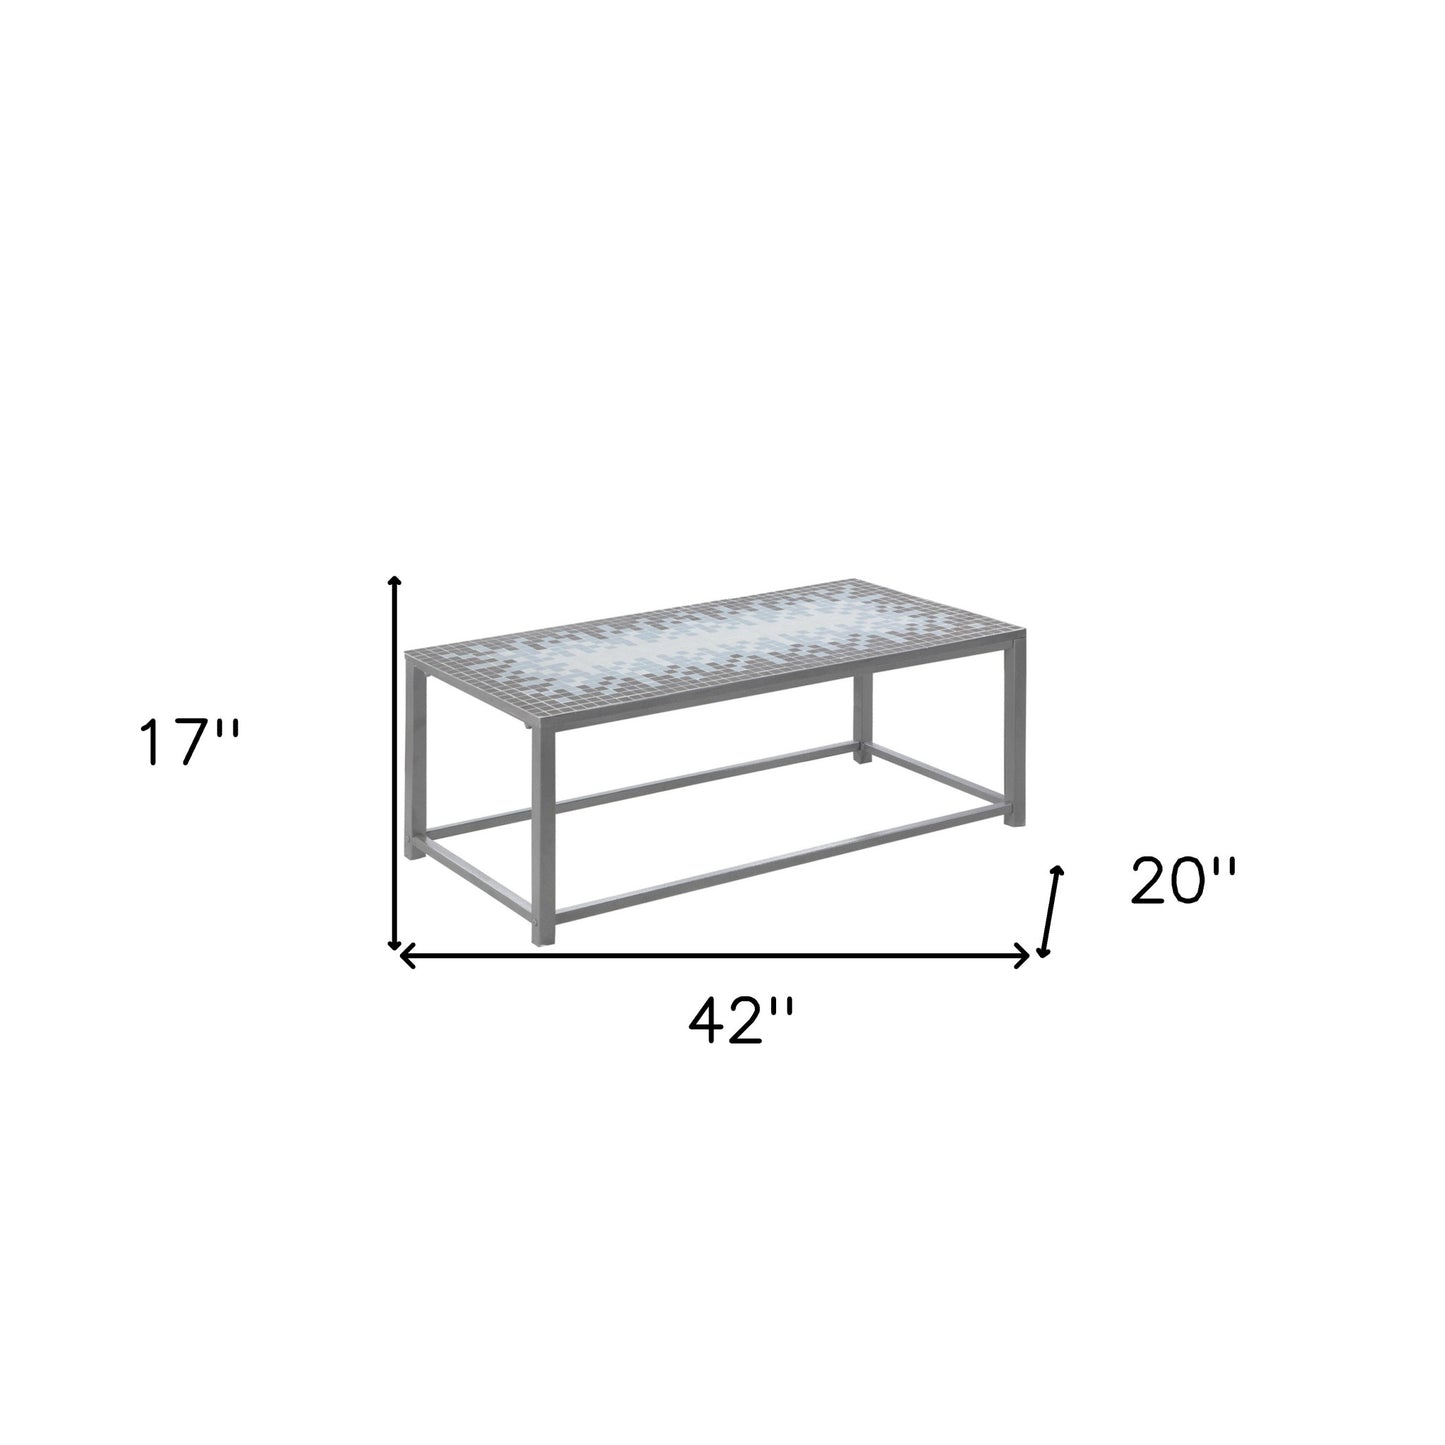 42" Grey Rectangular Coffee Table By Homeroots